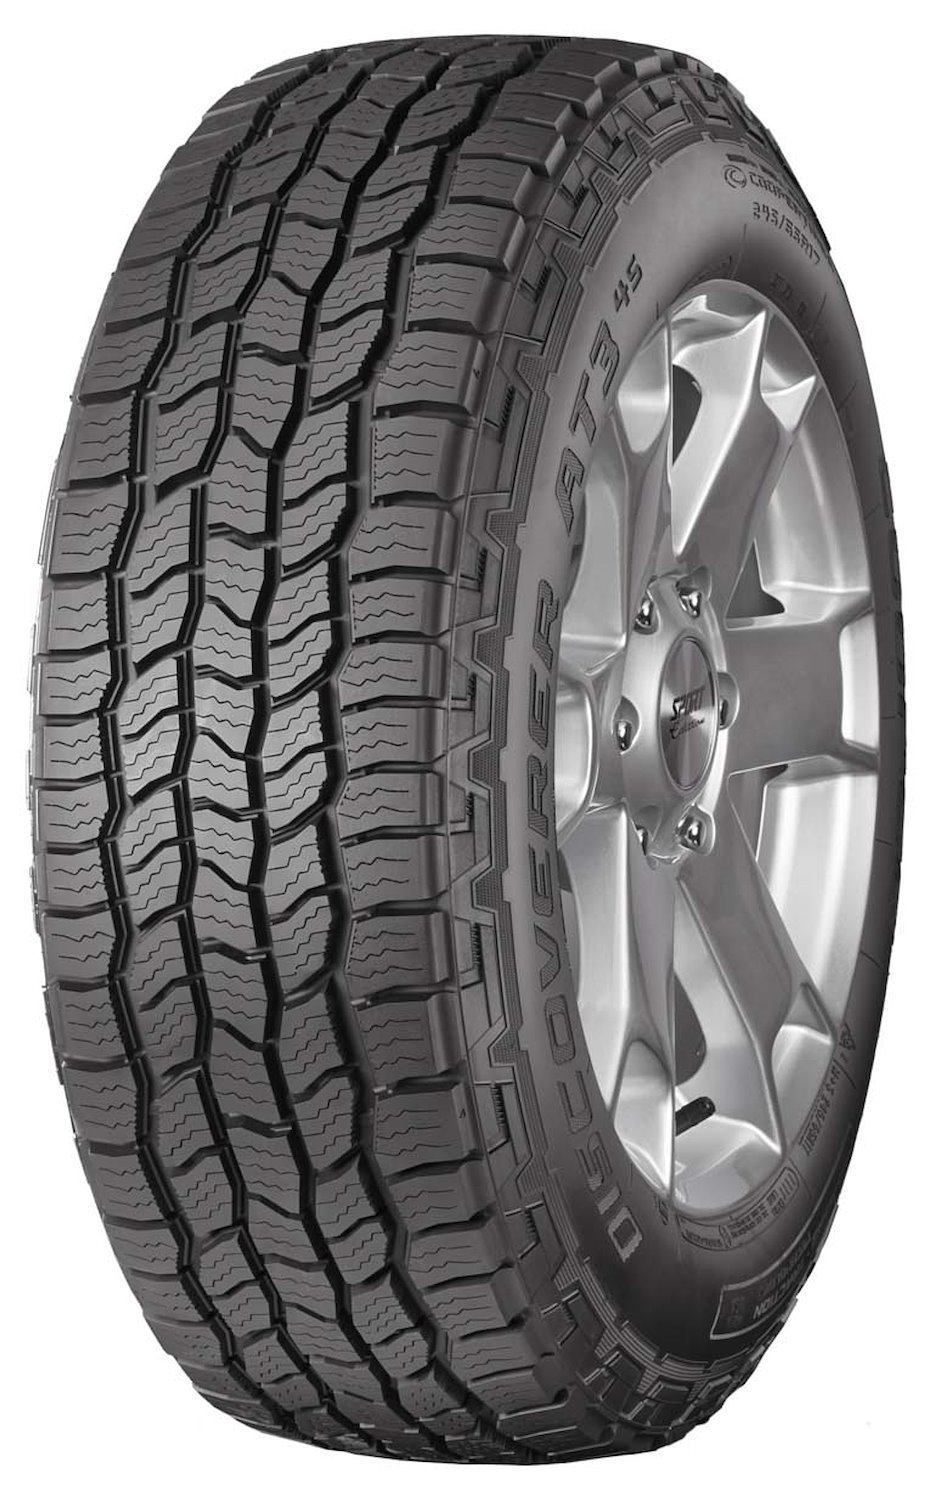 Discoverer AT3 4S All-Terrain Tire, 245/70R17